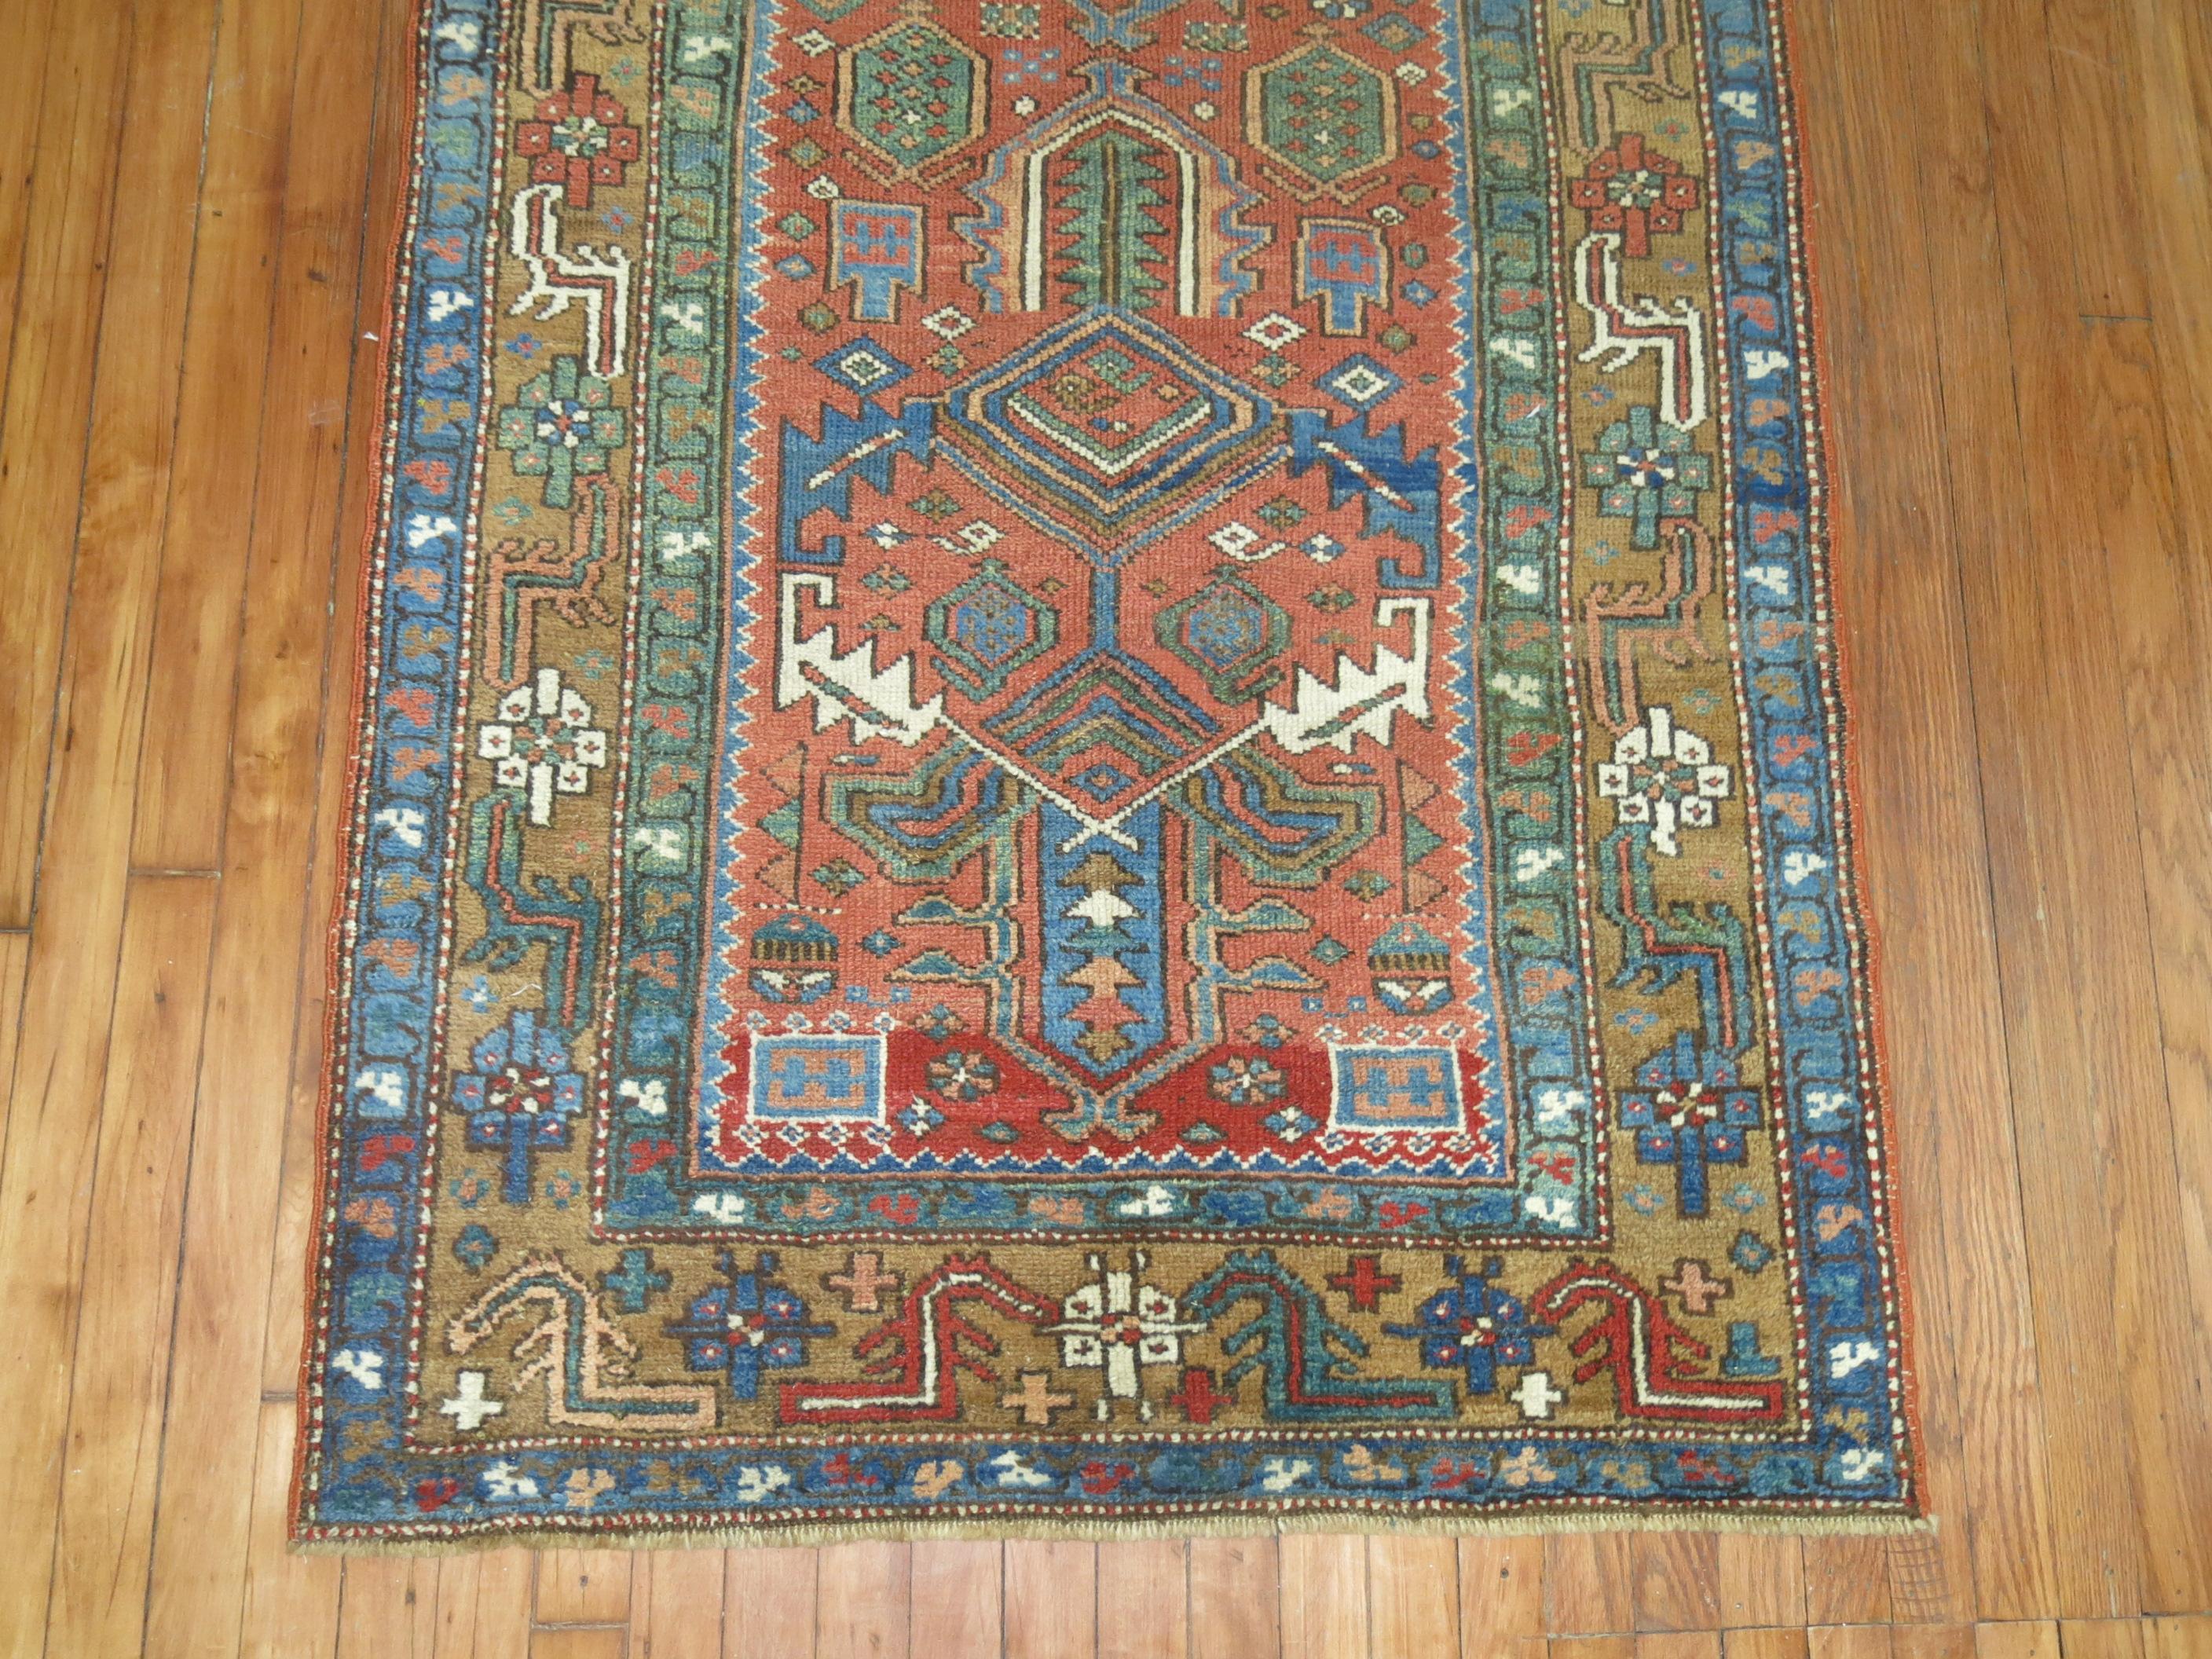 A one of a kind decorative antique Persian Heriz runner.

With distinctive large-scale motifs and a wide ranging palette of warm colors, the antique Heriz carpet is probably the most popular of the Persian village carpets. In constant, increasing